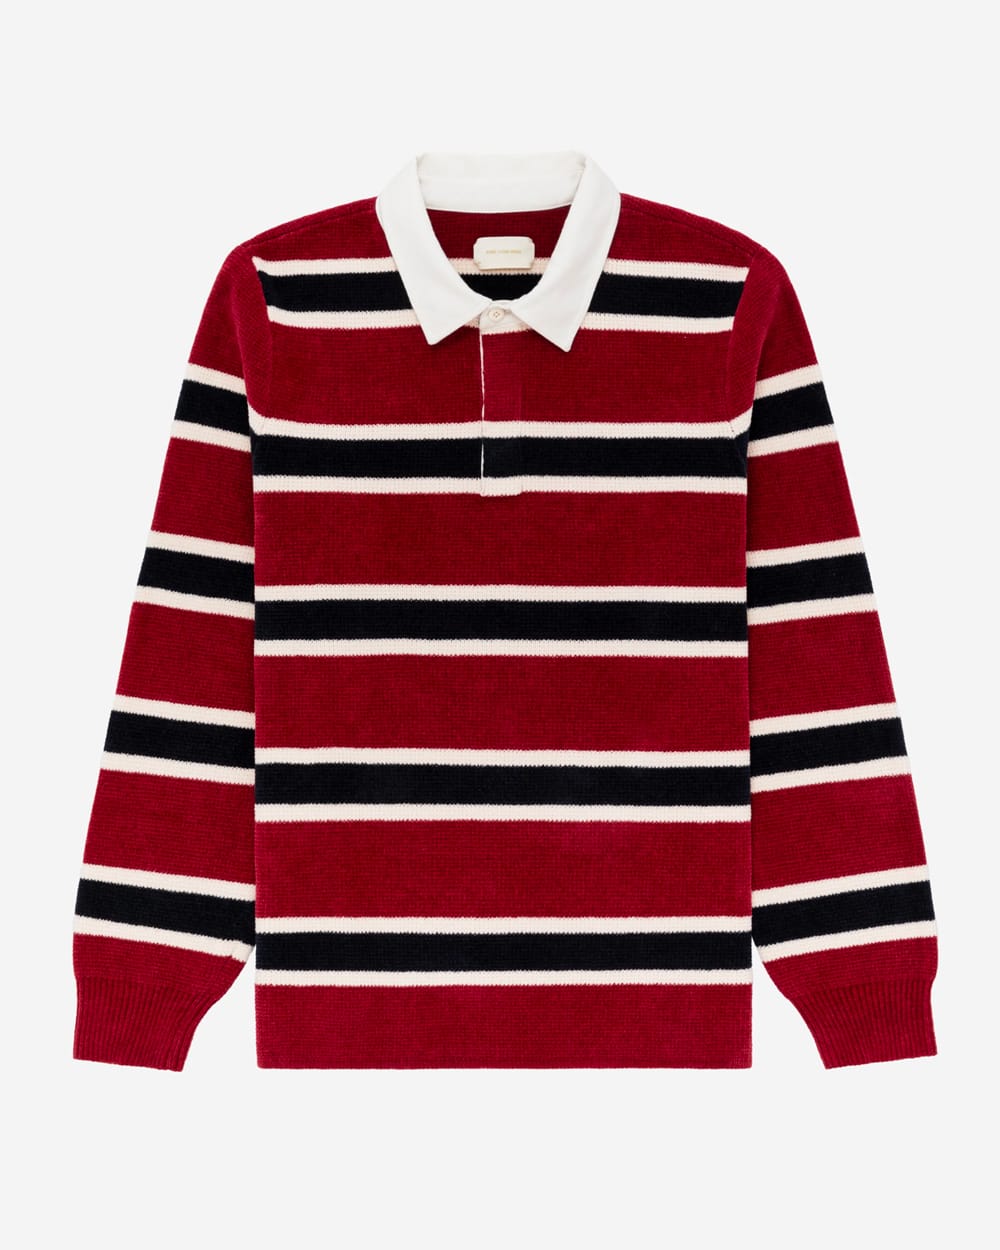 30 Best Preppy Clothing Brands: Modern Ivy League Style (2023)